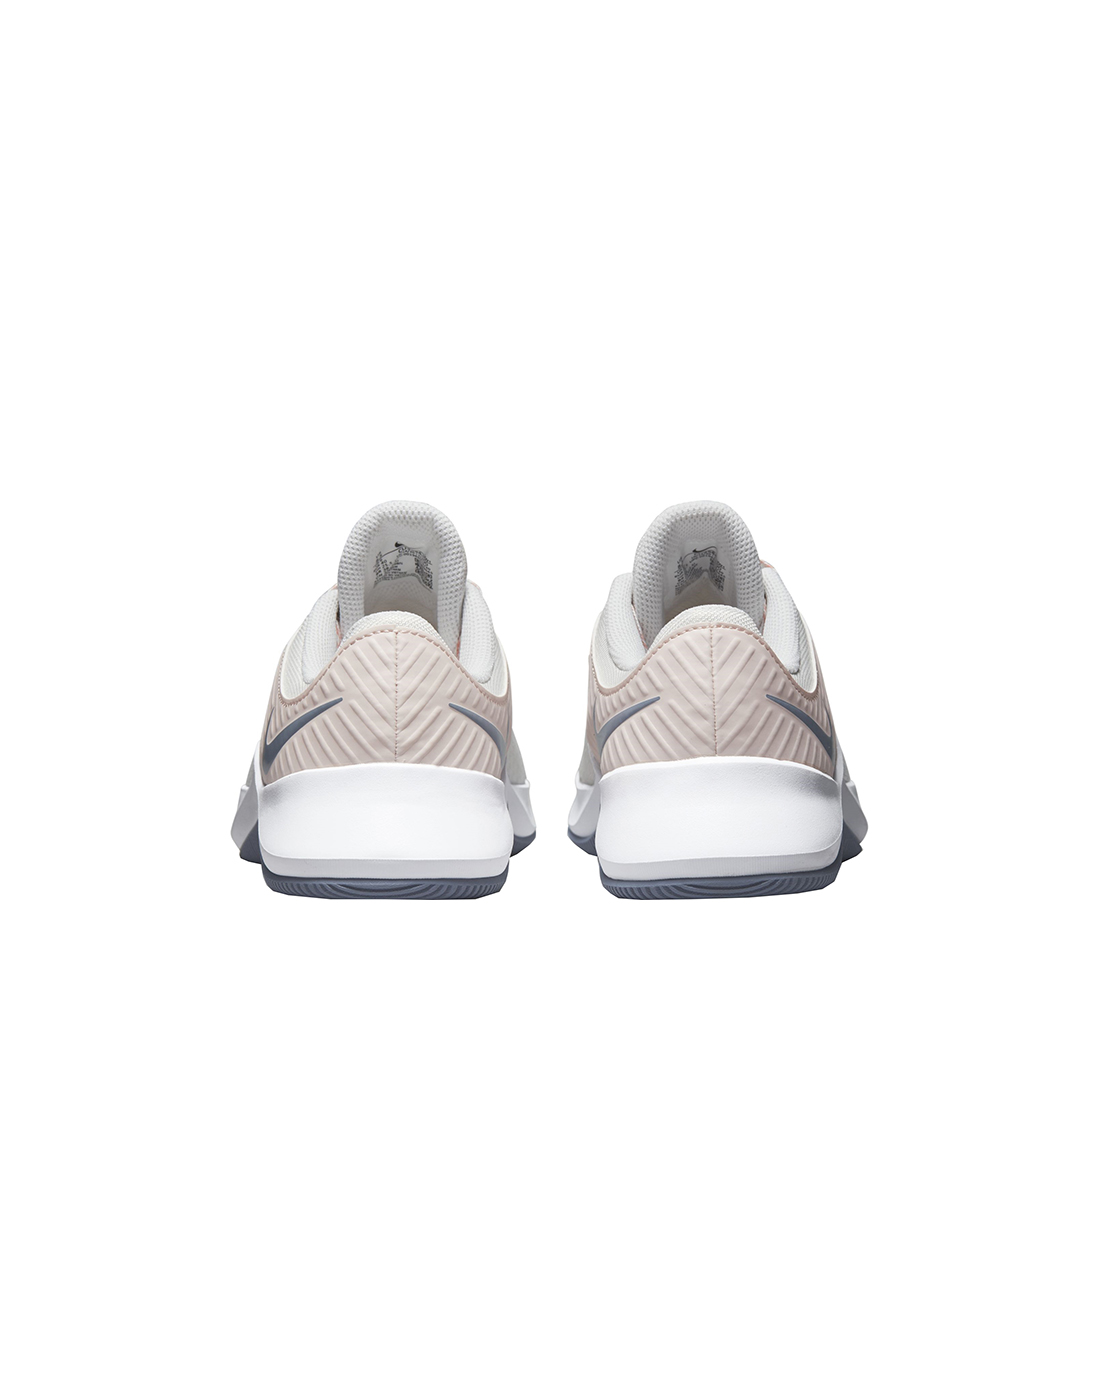 Nike Womens Mc Trainer - White | Life Style Sports IE